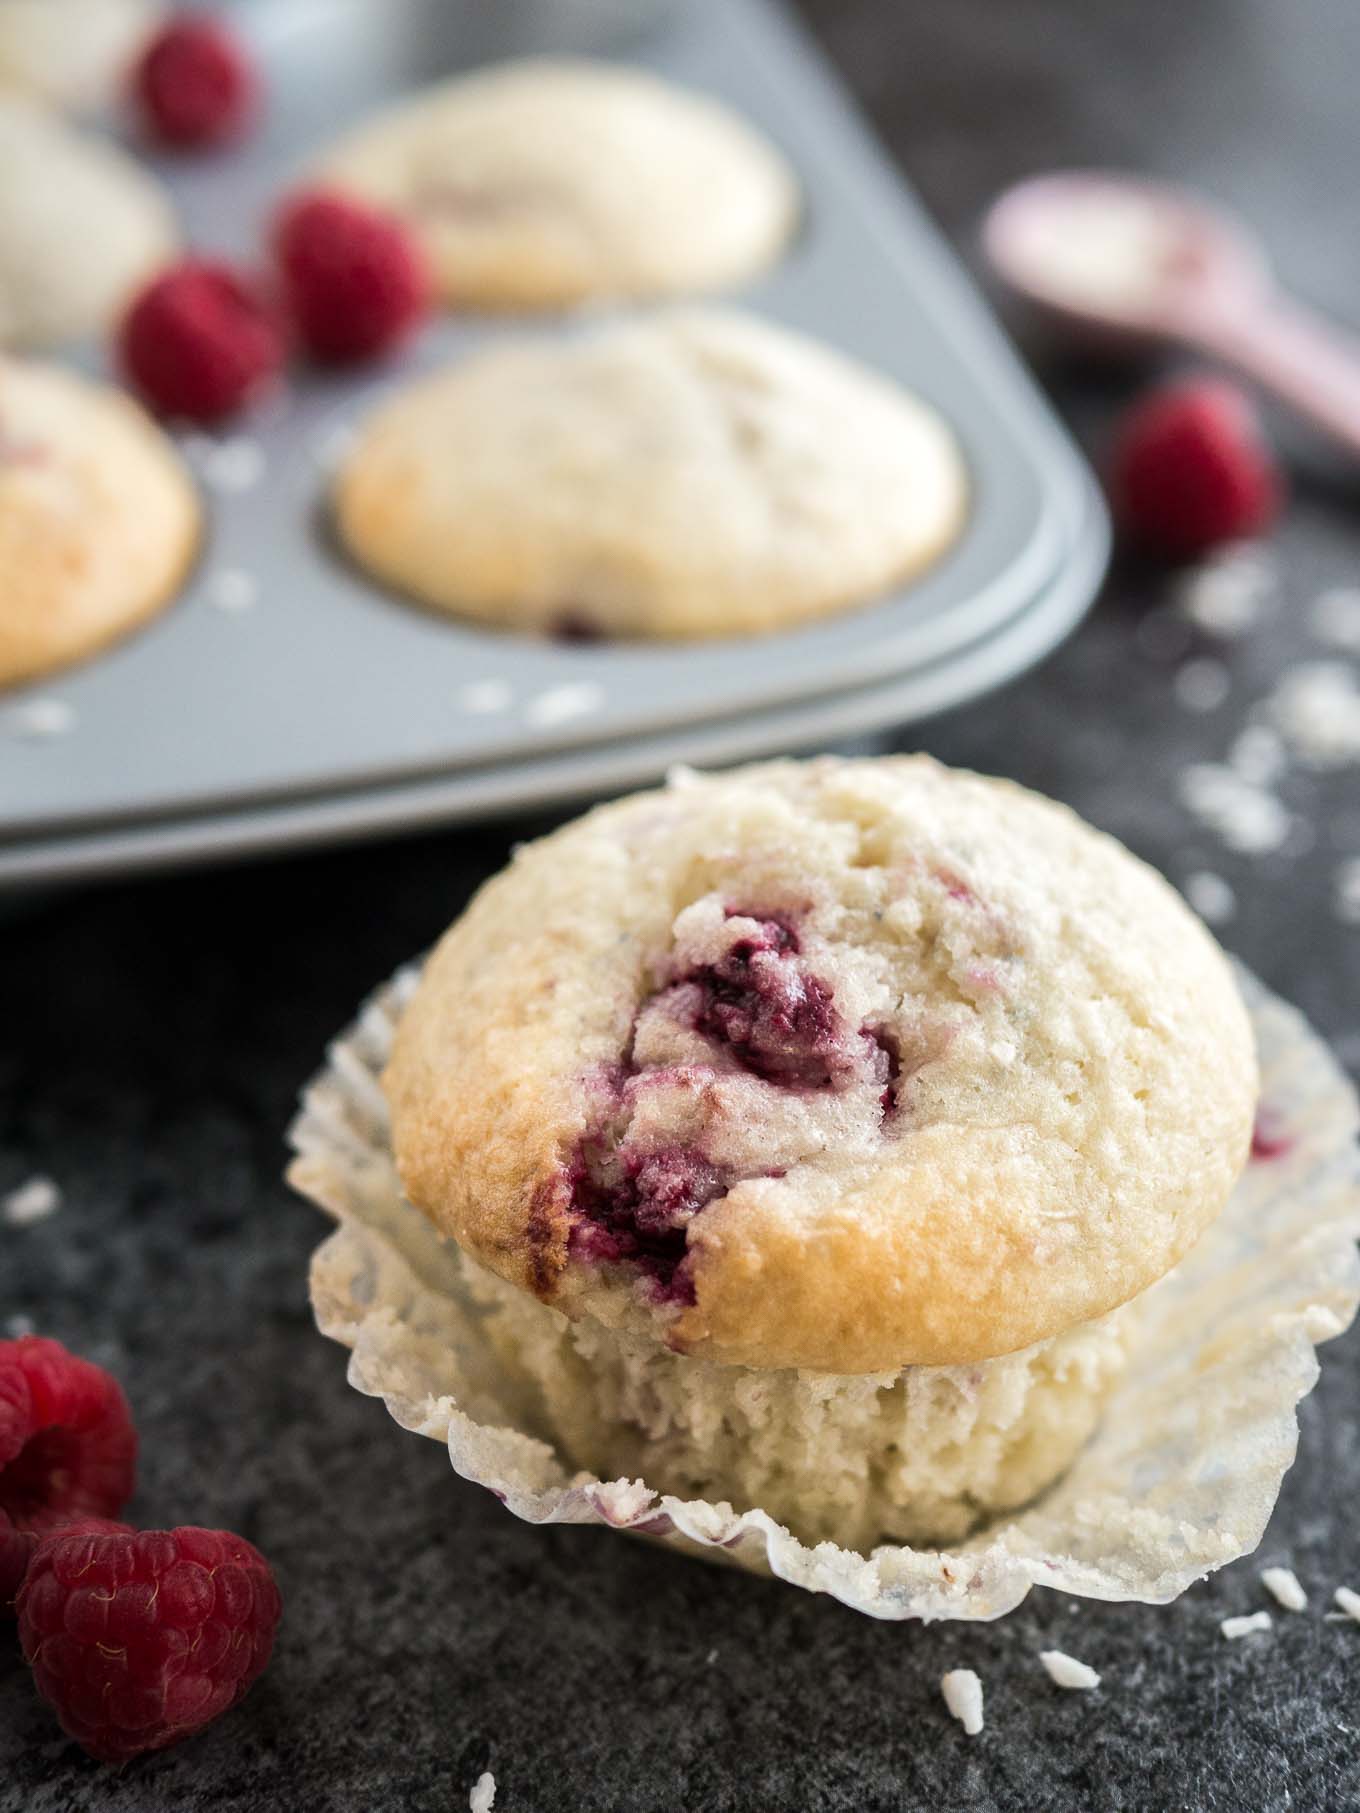 A coconut raspberry muffin with its liner opened sitting on a dark surface. There are raspberries, a pink measuring spoon with coconut flakes and a grey muffin pan with more muffins next to it.